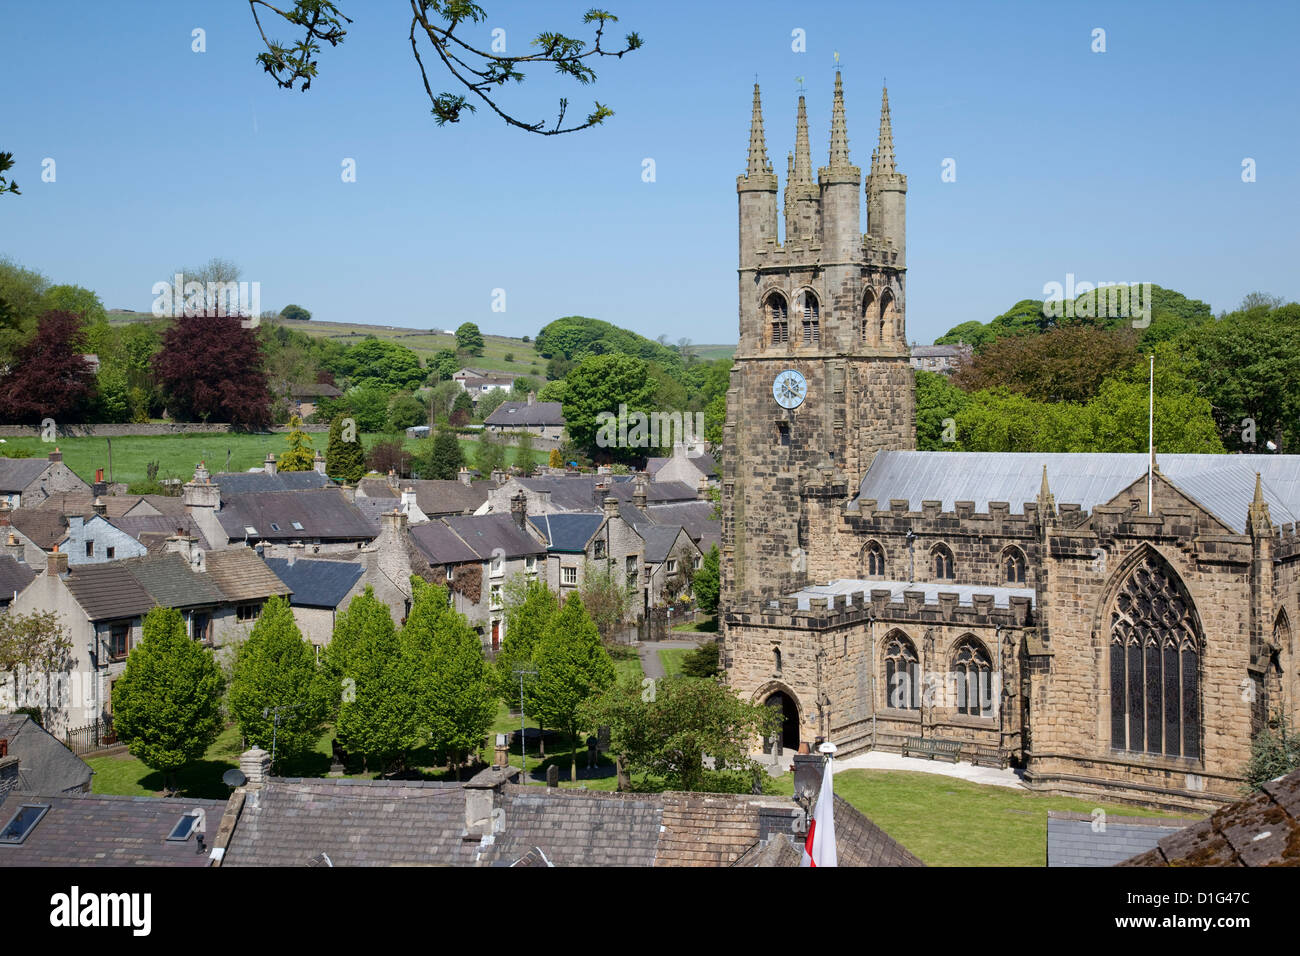 Tideswell Church, the Cathedral of The Peak, Peak District, Derbyshire, England, United Kingdom, Europe Stock Photo